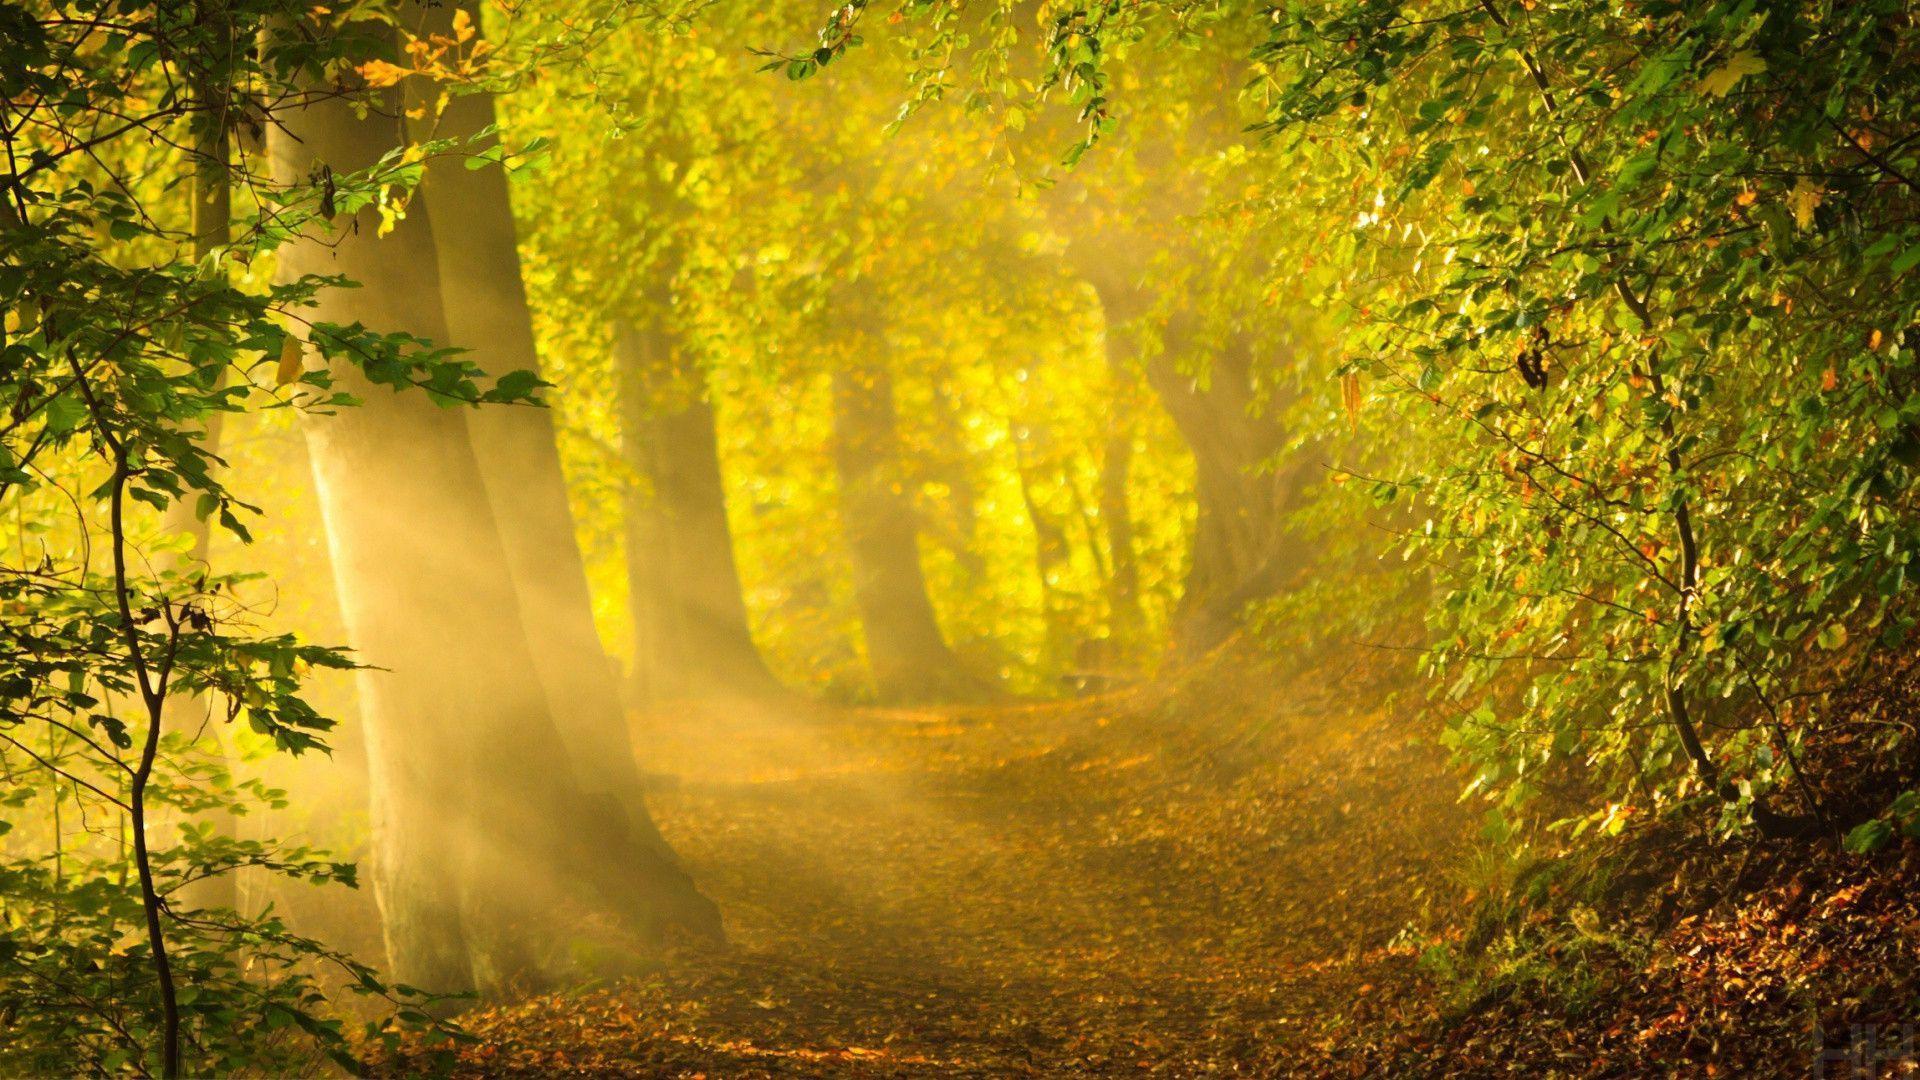 Enchanted Forest Path Wallpaper In 1920x1080 Picture